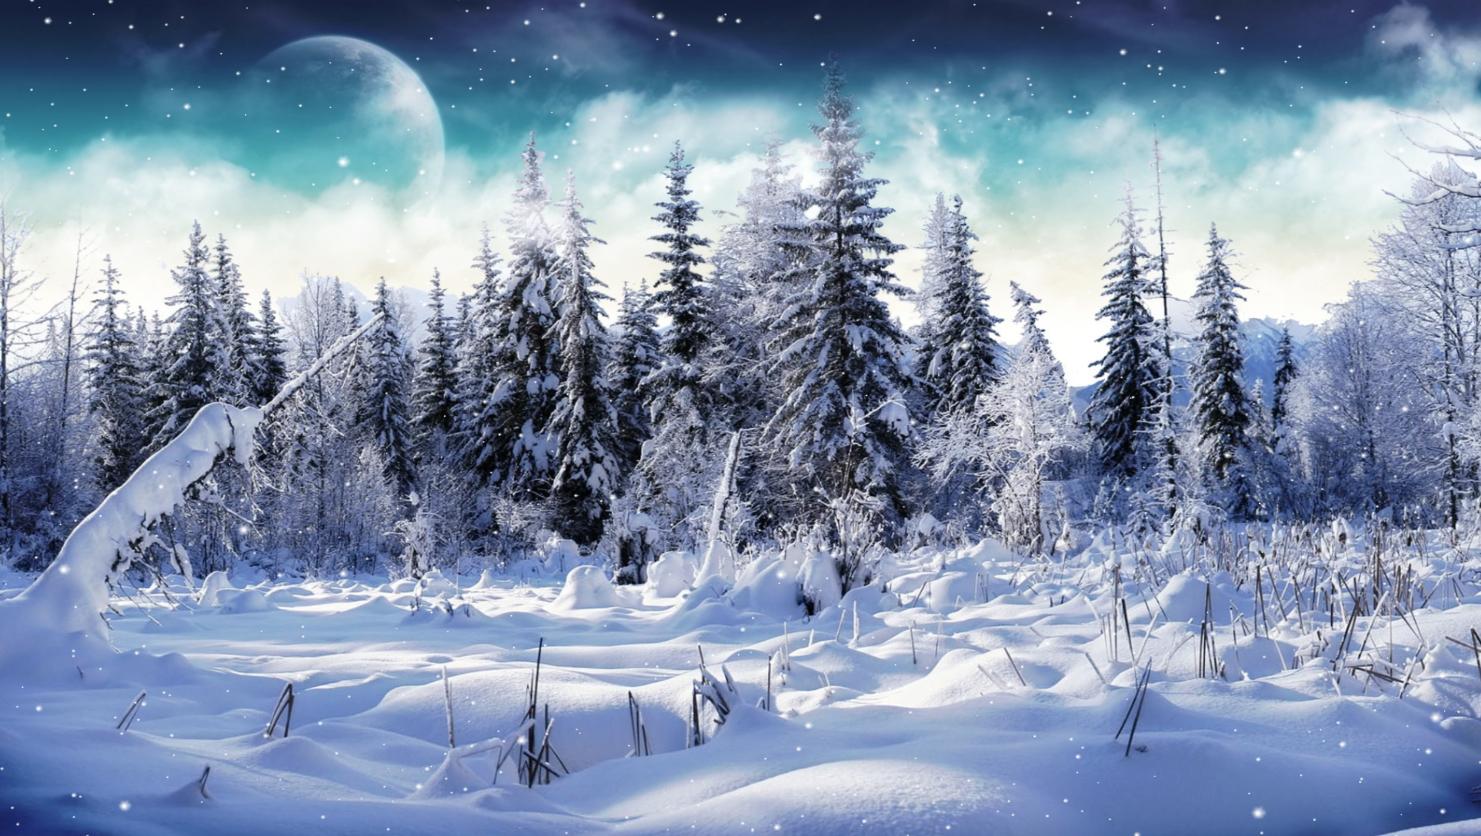 Free download Download Cold Winter Animated Wallpaper DesktopAnimatedcom [1481x836] for your Desktop, Mobile & Tablet. Explore Animated Snow Falling Wallpaper. Free Animated Snowy Christmas Wallpaper, Snow Falling Wallpaper Free